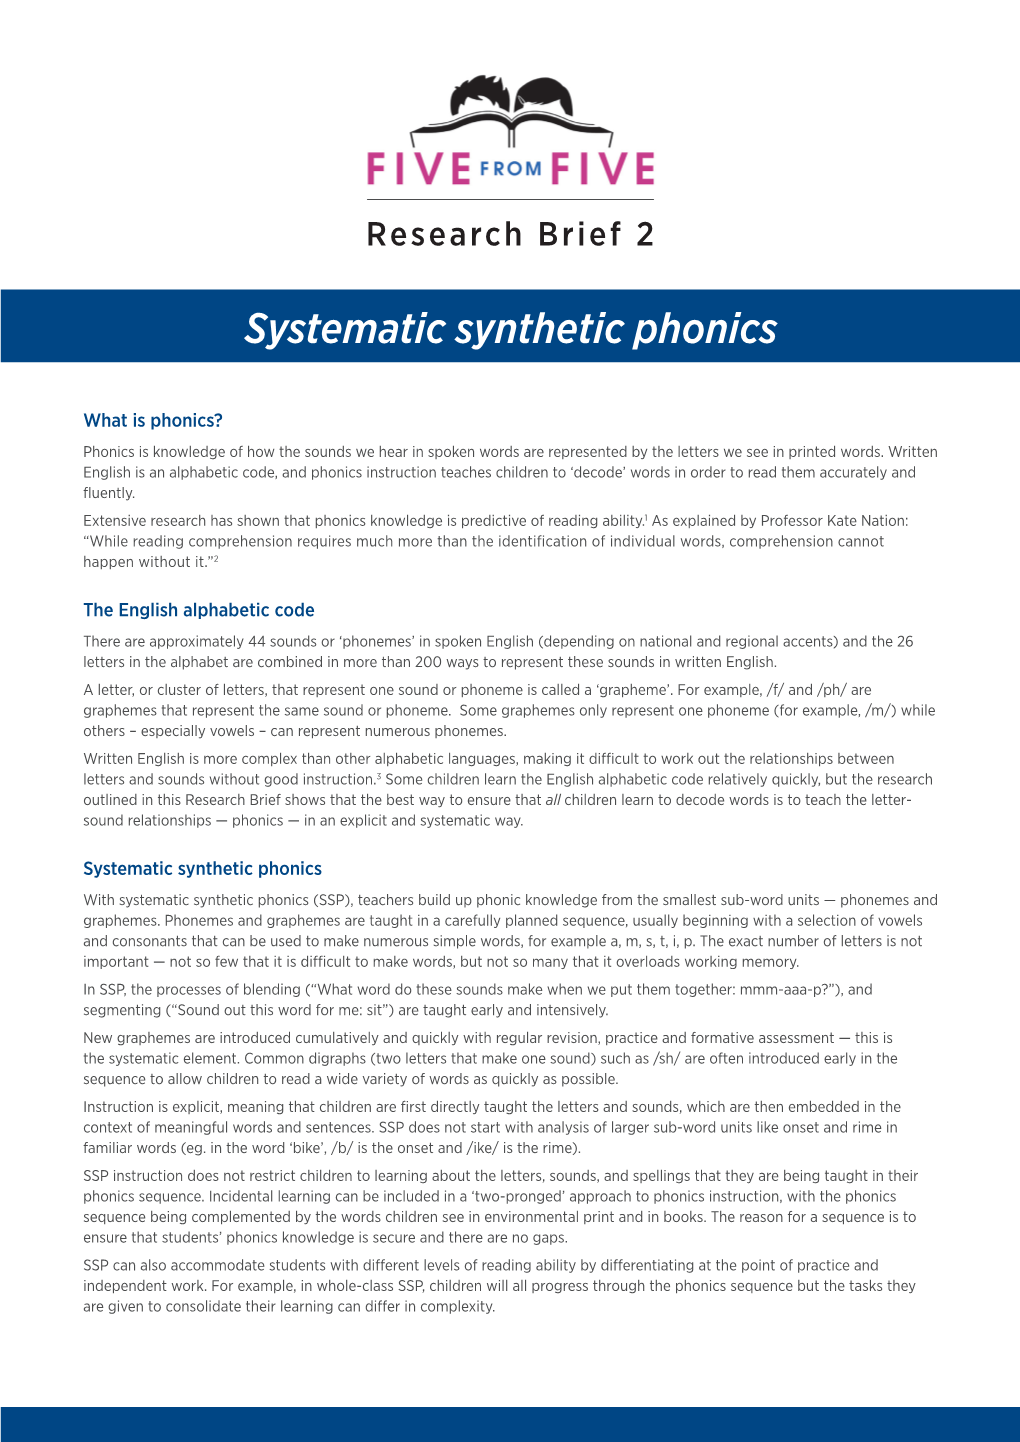 Systematic Synthetic Phonics